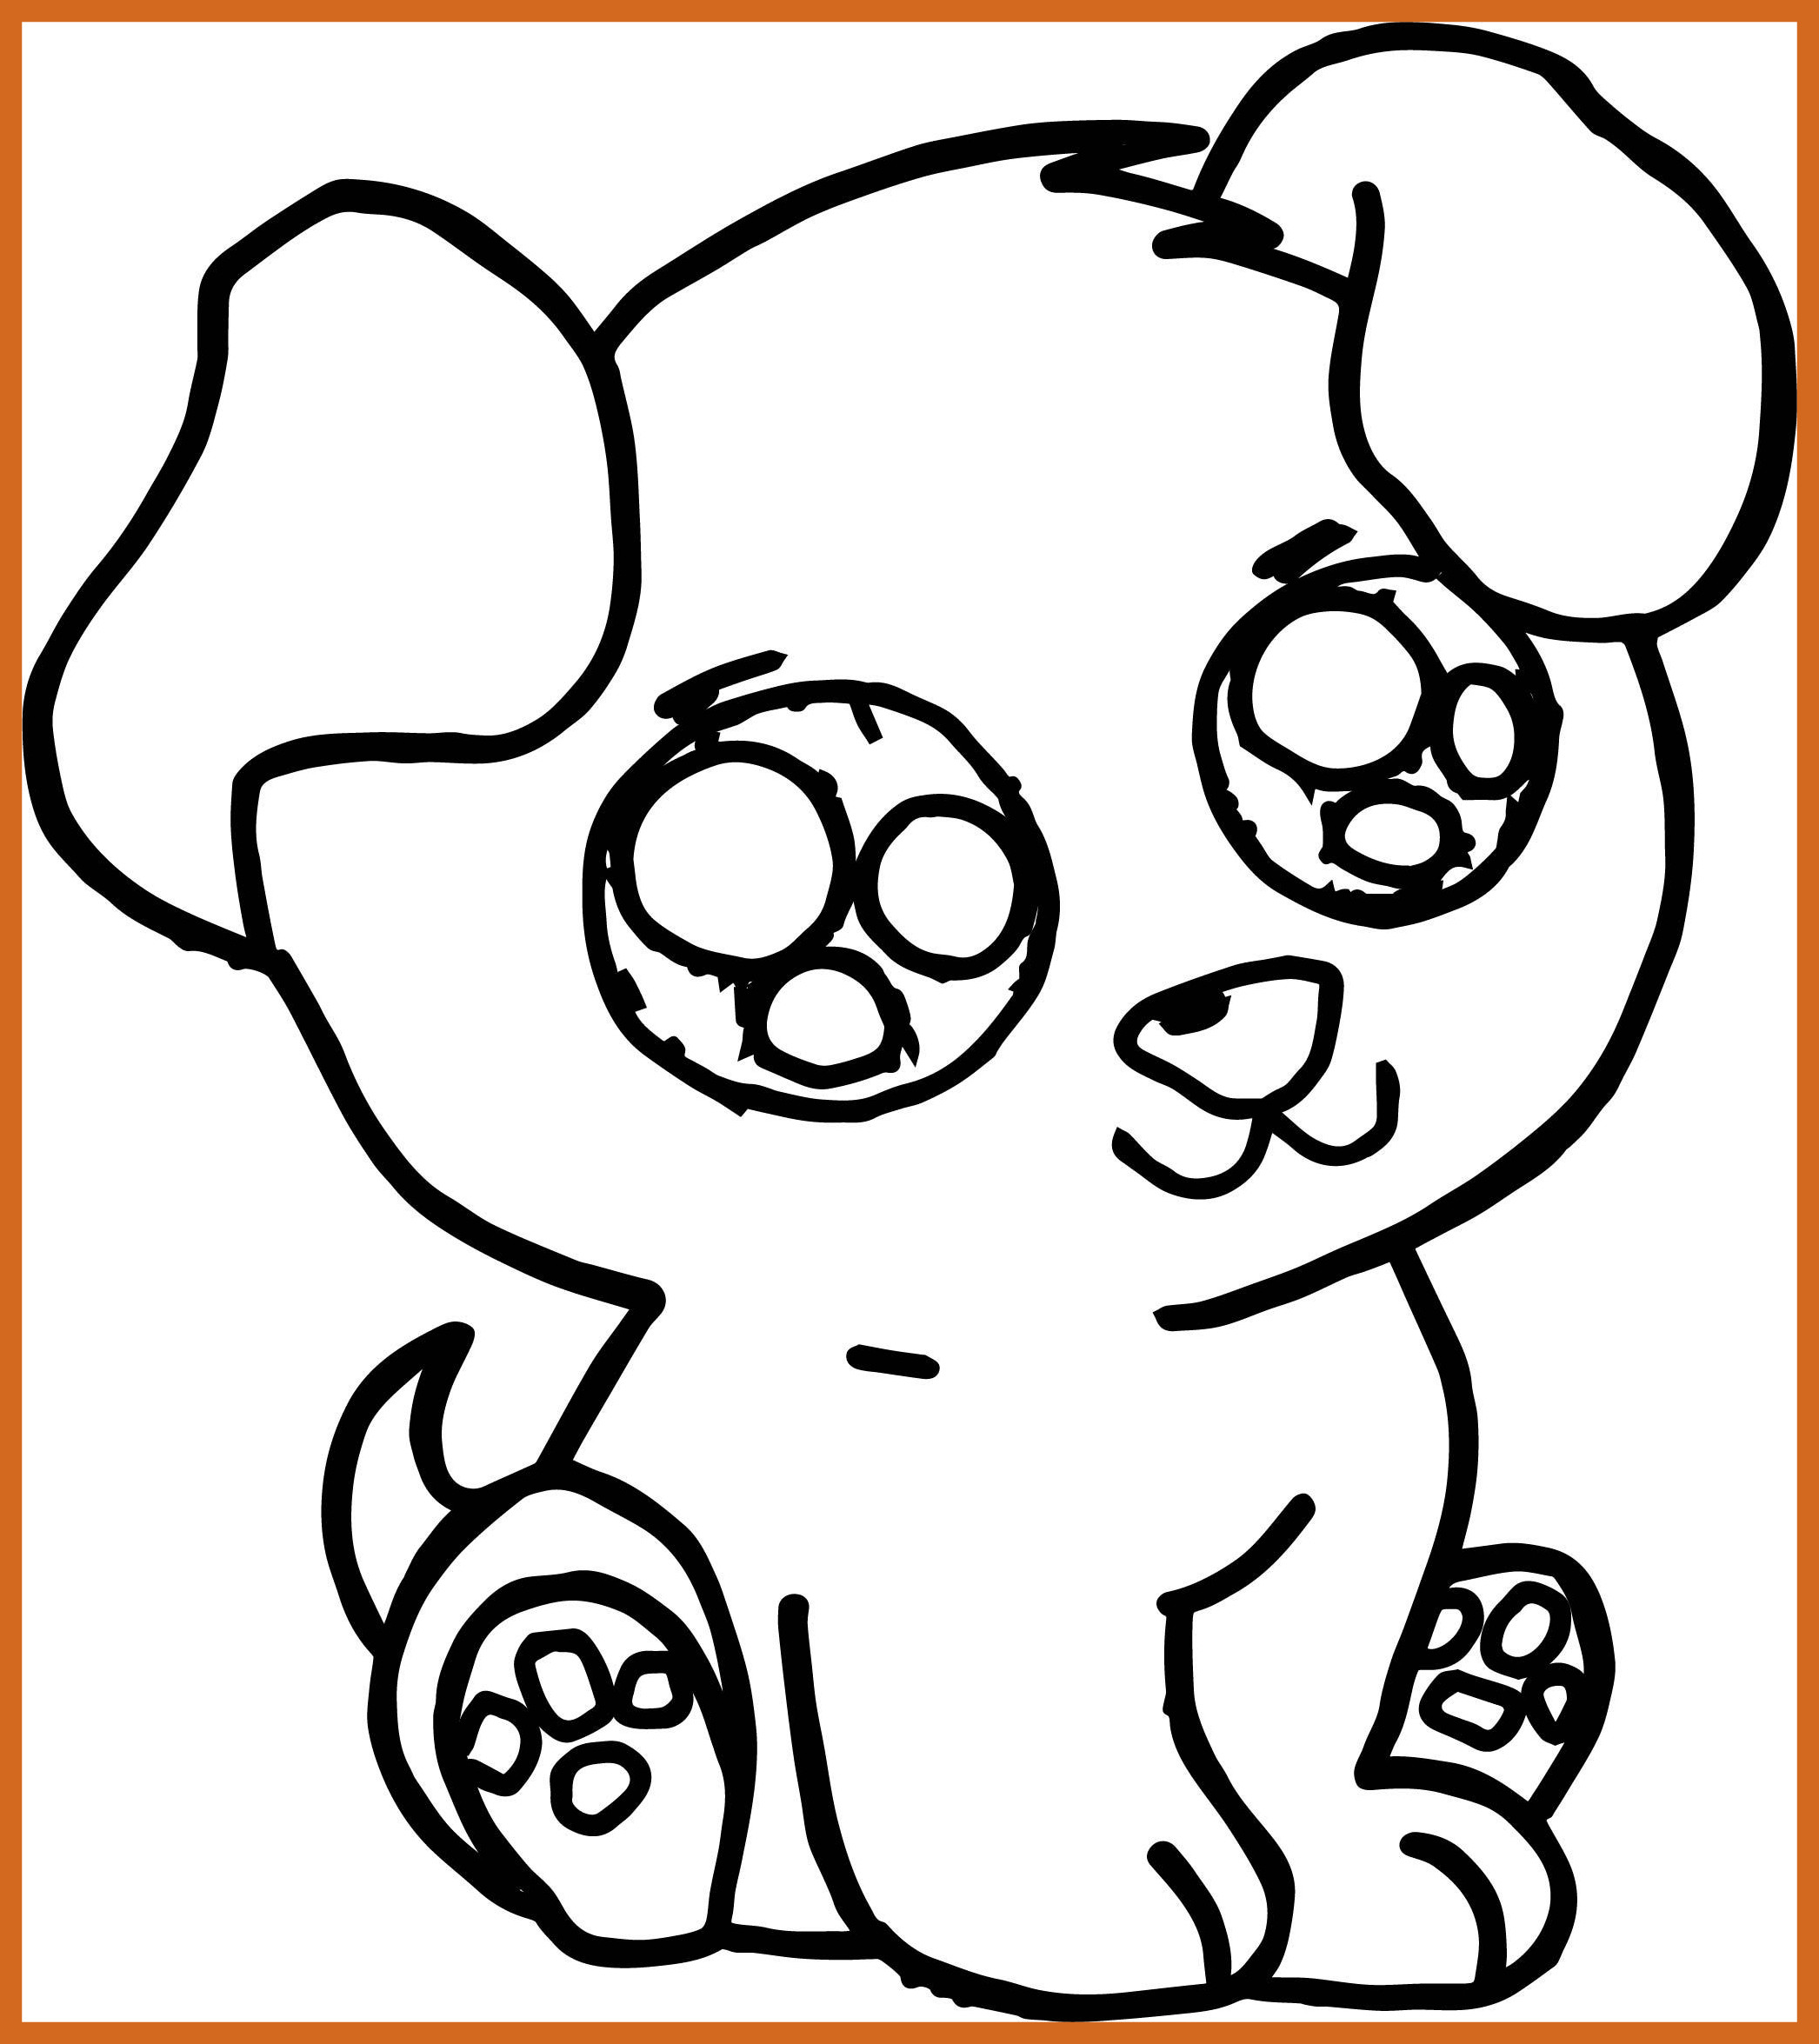 Dog Coloring Pages at GetColorings.com | Free printable colorings pages